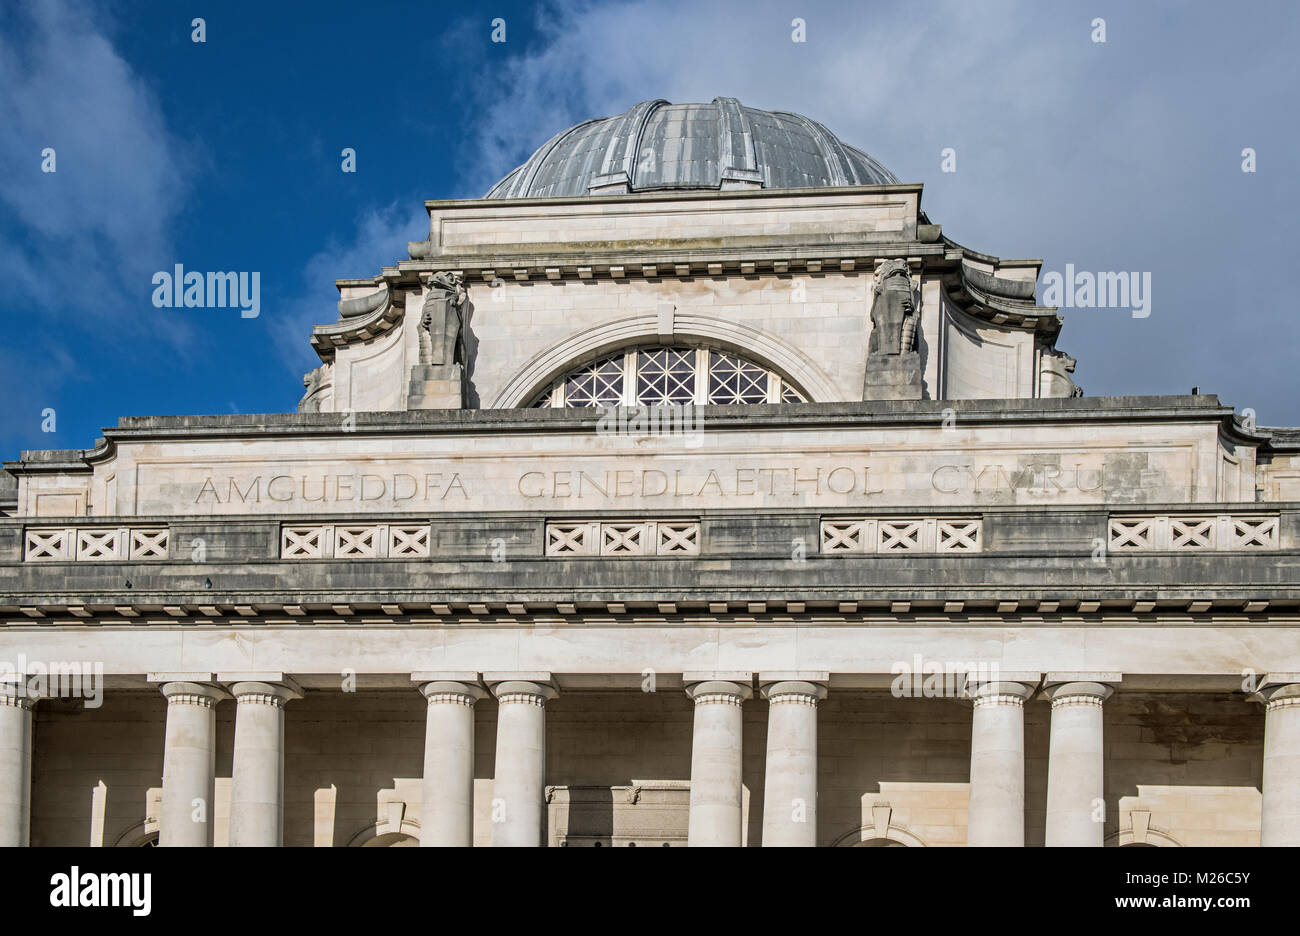 The Dome of the National Museum of Wales in Cathays park Cardiff Stock Photo